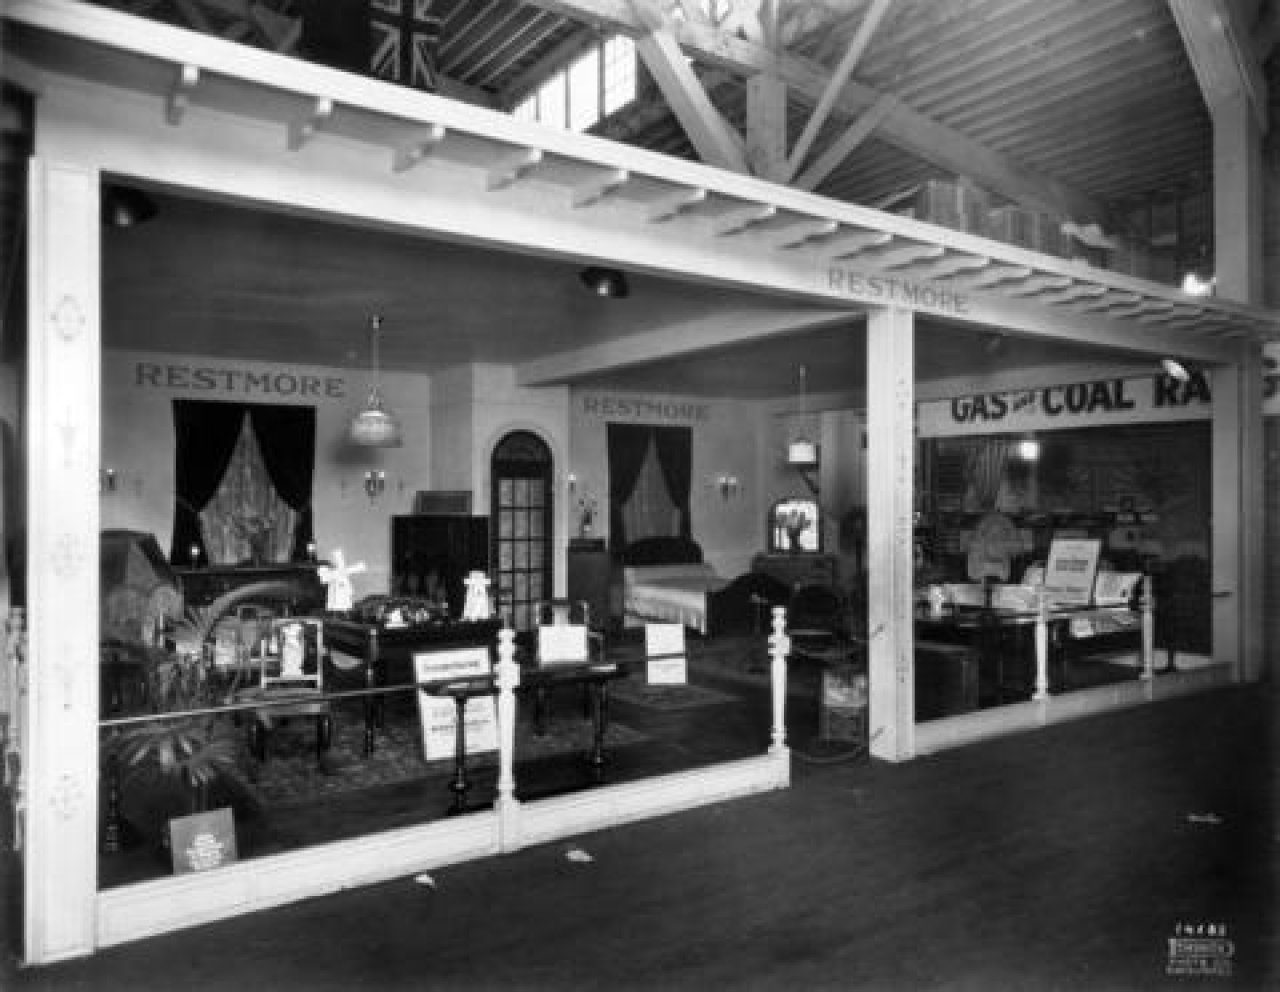 Restmore Furniture Display c. 1928. Robert Hunter and his son, Robert Hunter Jr. worked at Restmore Manufacturing Company Ltd. Robert Sr. was a secretary treasurer, while Robert Jr. was a salesman. Source: City of Vancouver Archives 180-030